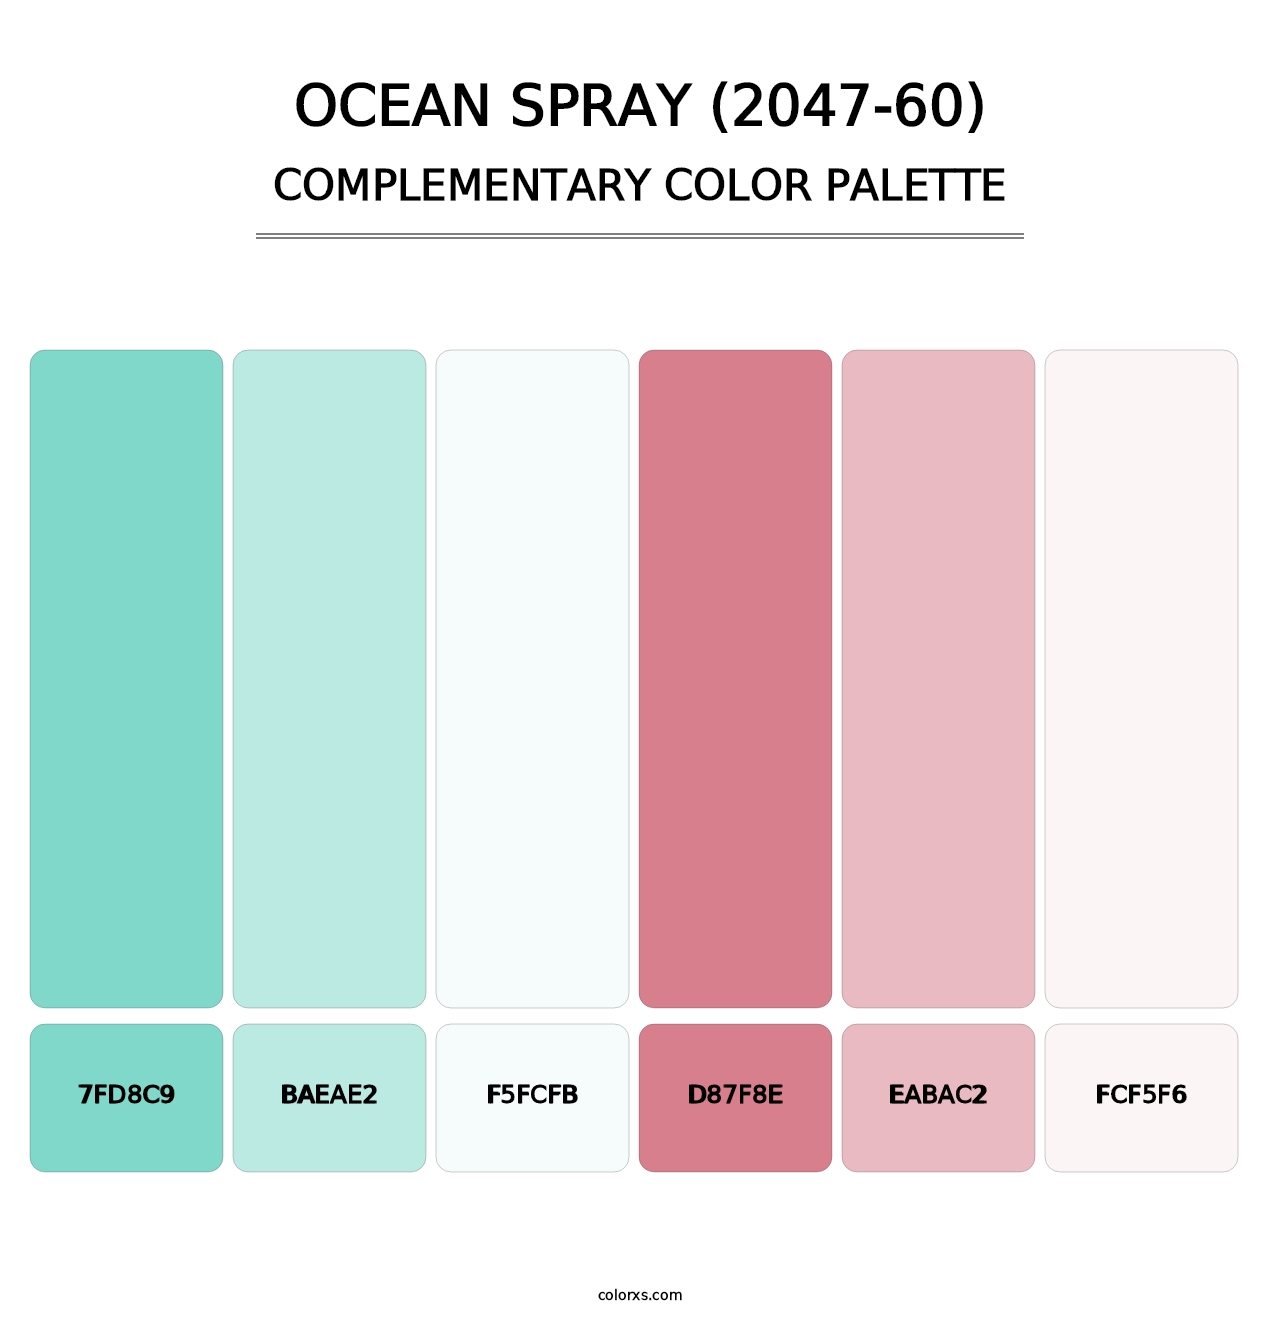 Ocean Spray (2047-60) - Complementary Color Palette